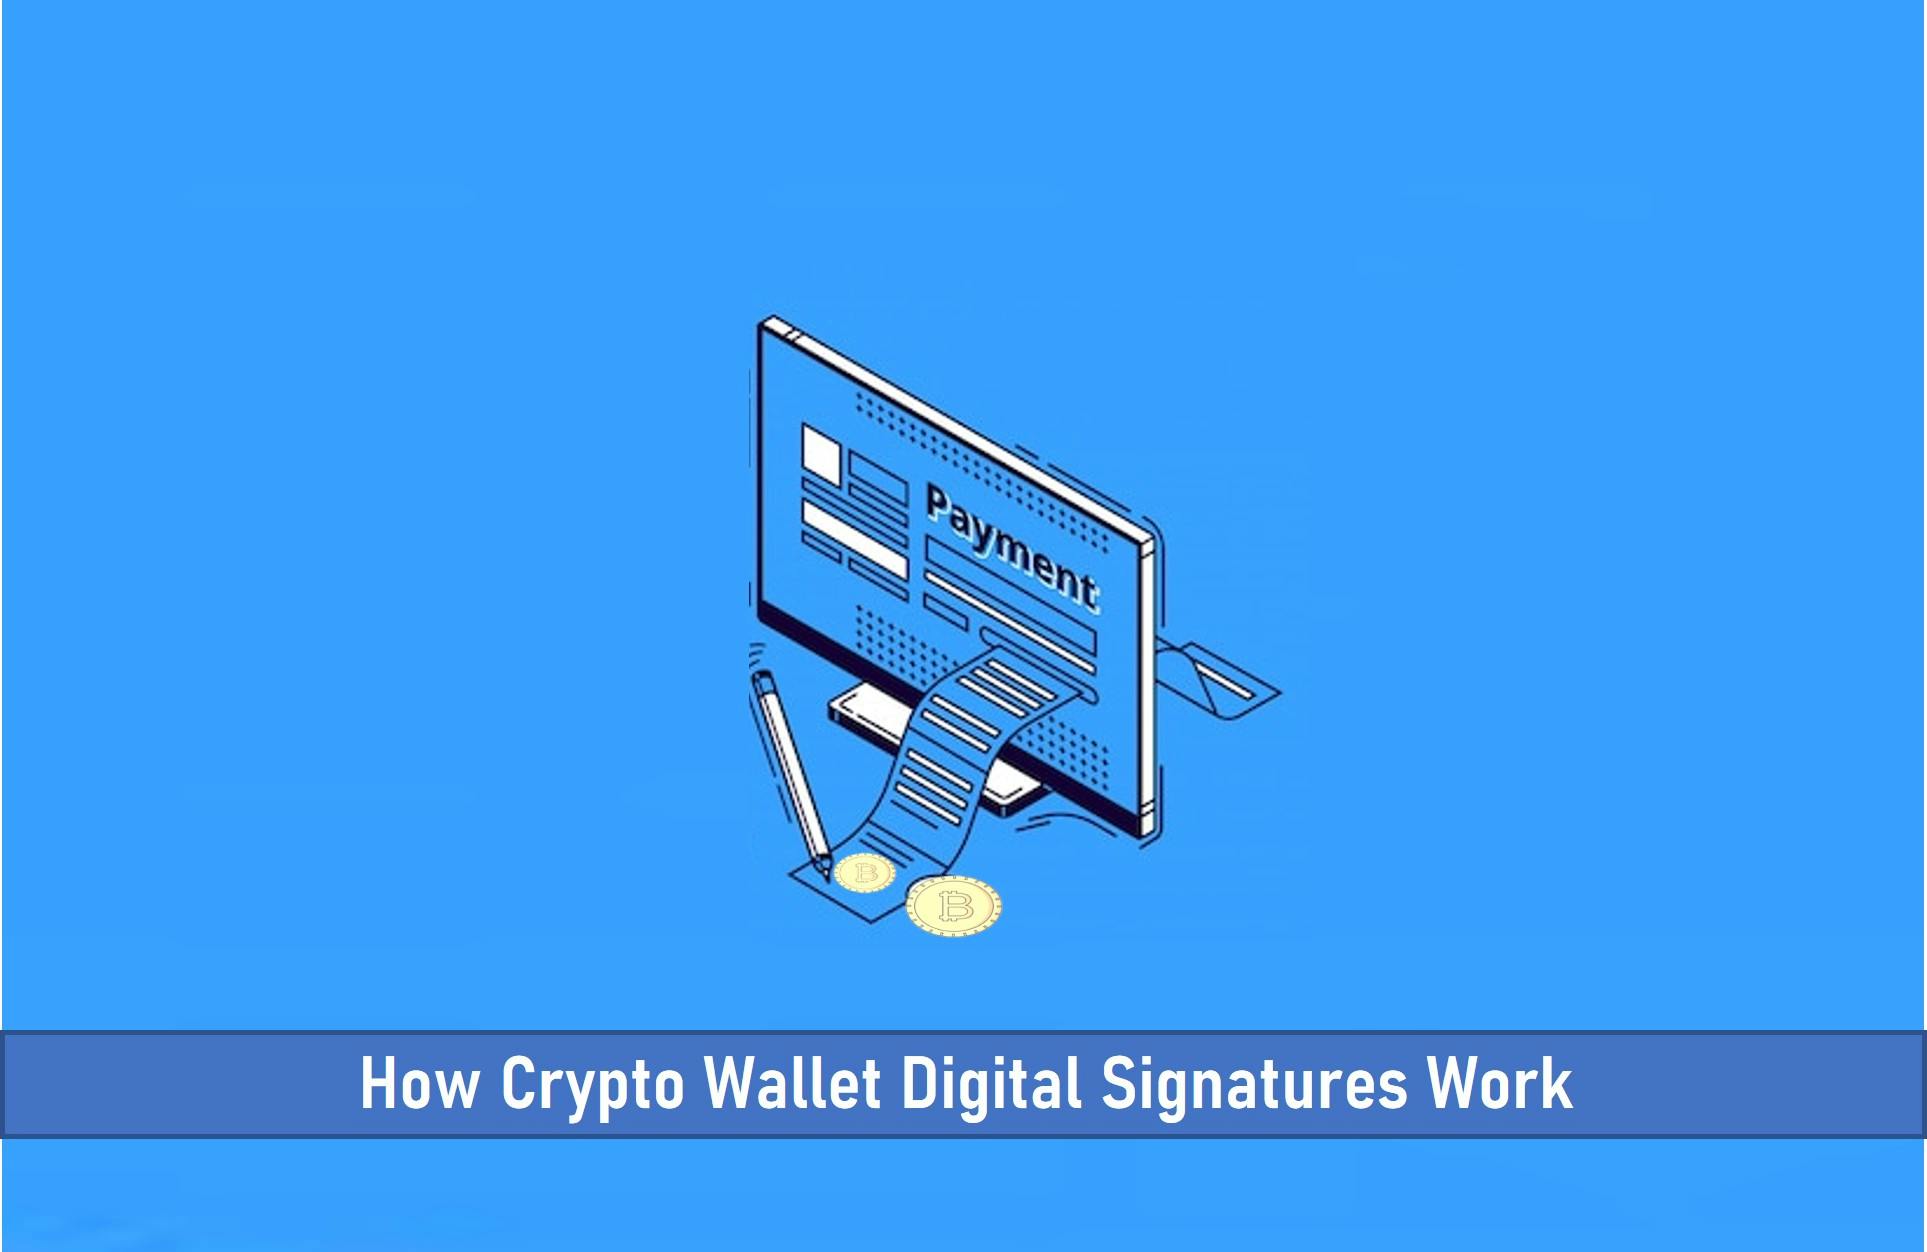 How Crypto Wallet Digital Signatures Work